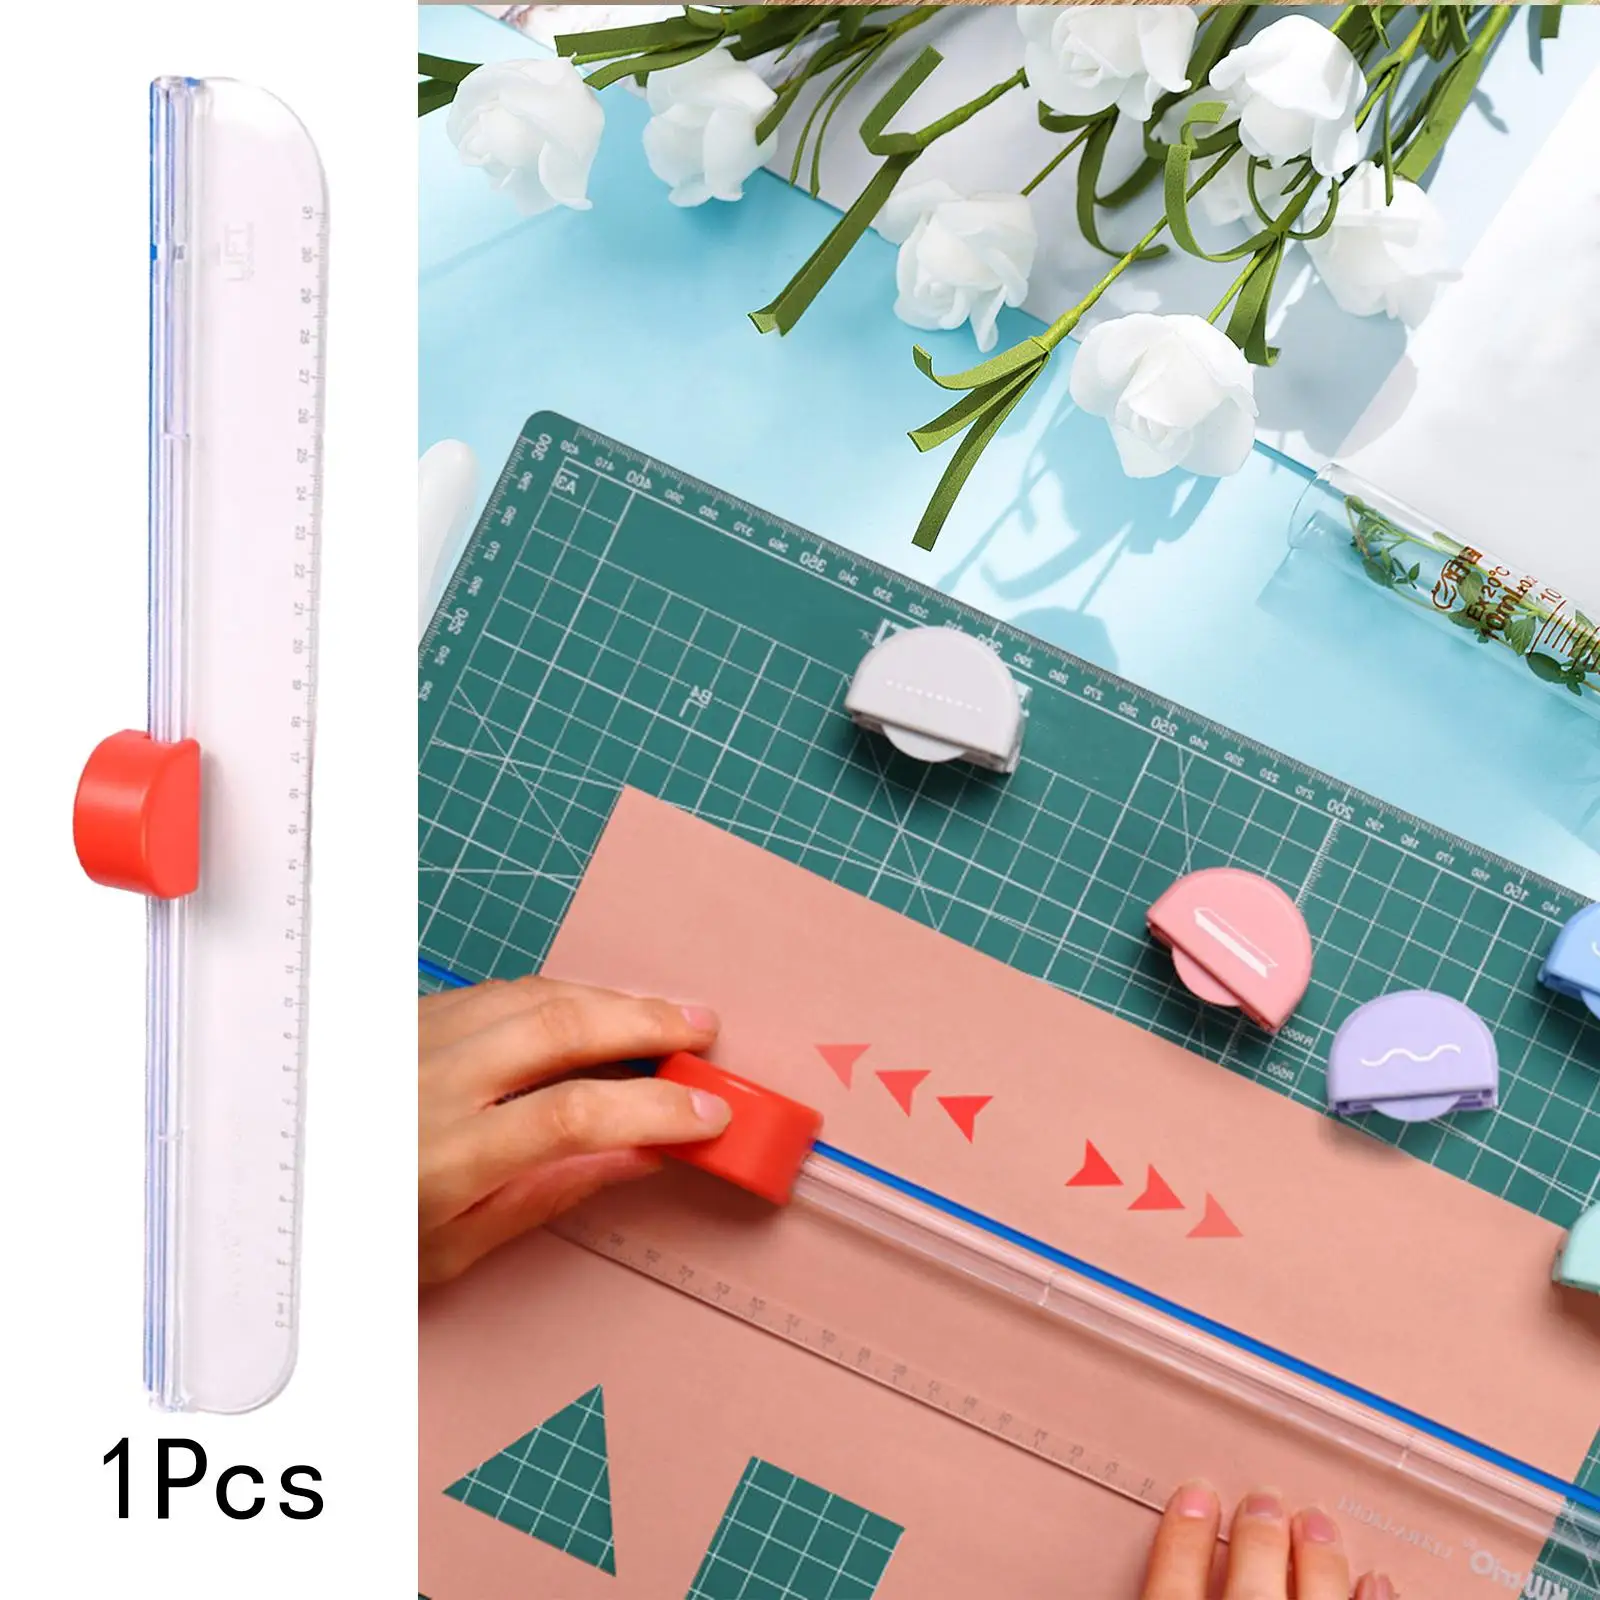 Small Paper Cutter Reusable Paper Trimmer for Paper Crafts Envelopes Photos